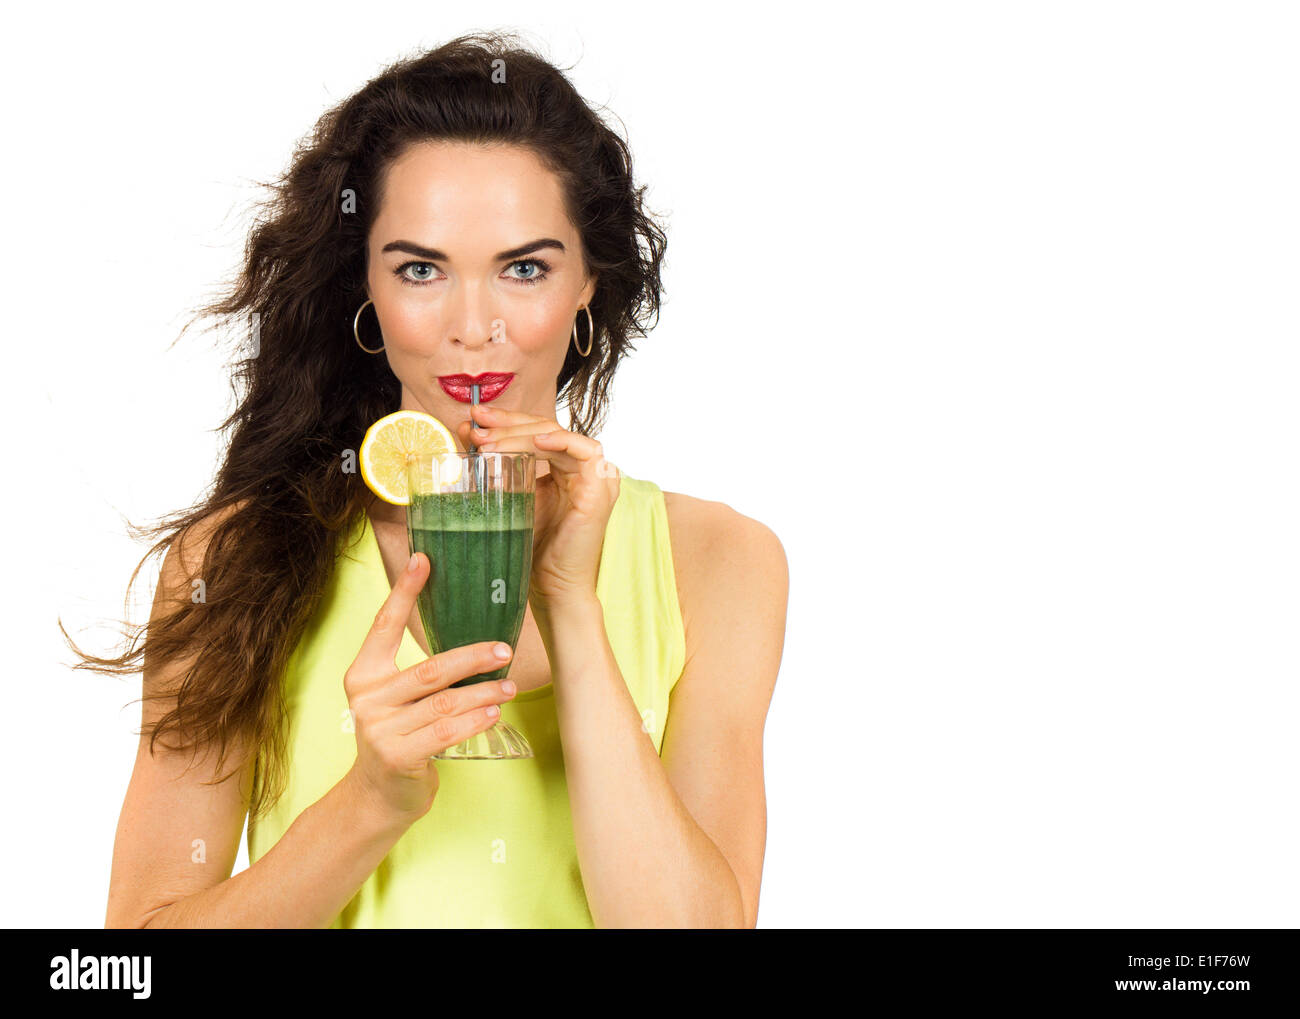 Beautiful healthy woman drinking an organic green smoothie. Isolated on white. Stock Photo